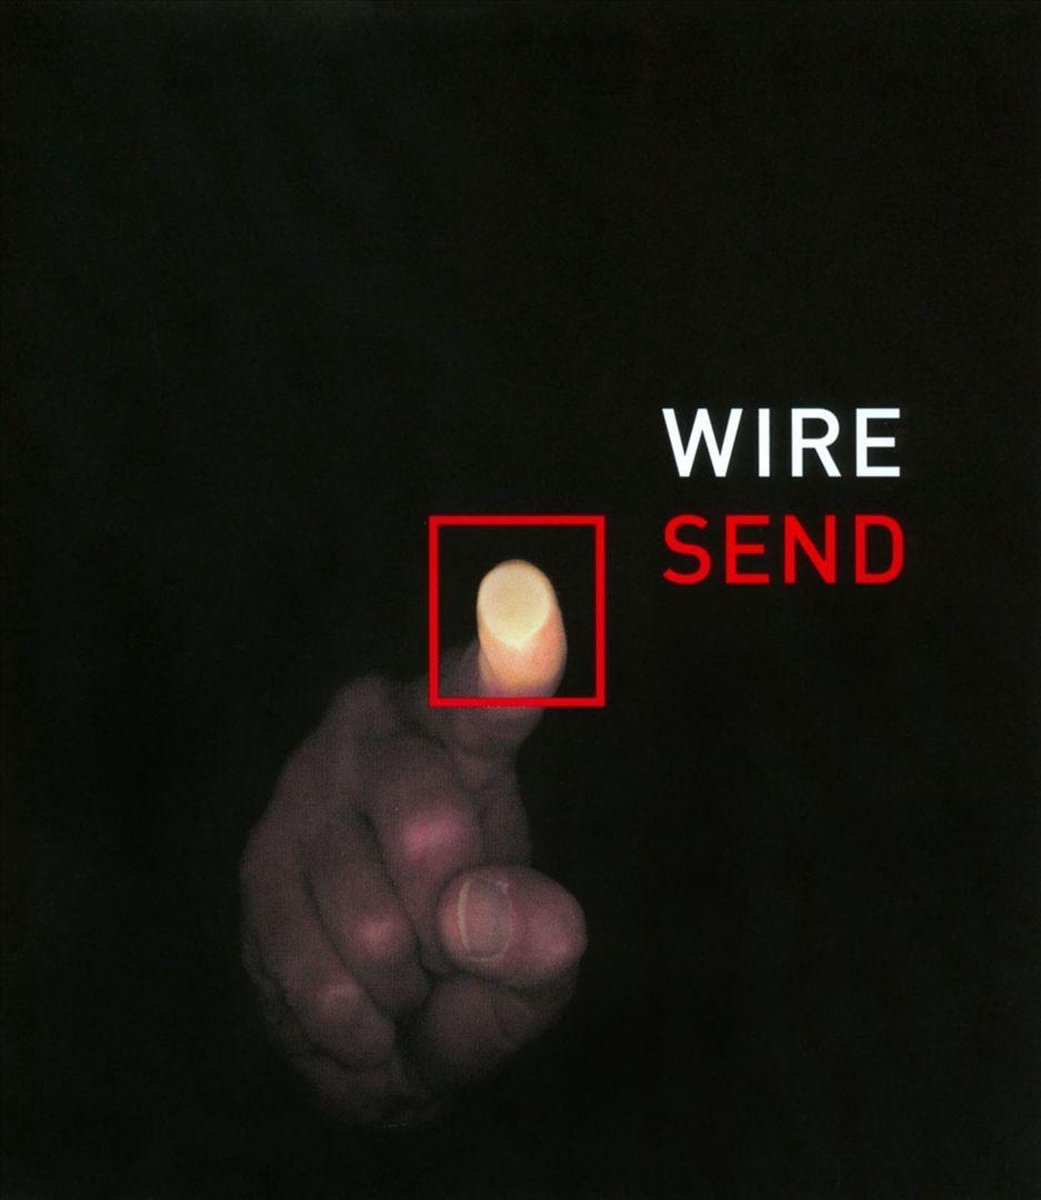 NEWS On this day, 21 ago, Wire returned after a hiatus of a decade with their 10th studio album, Send!